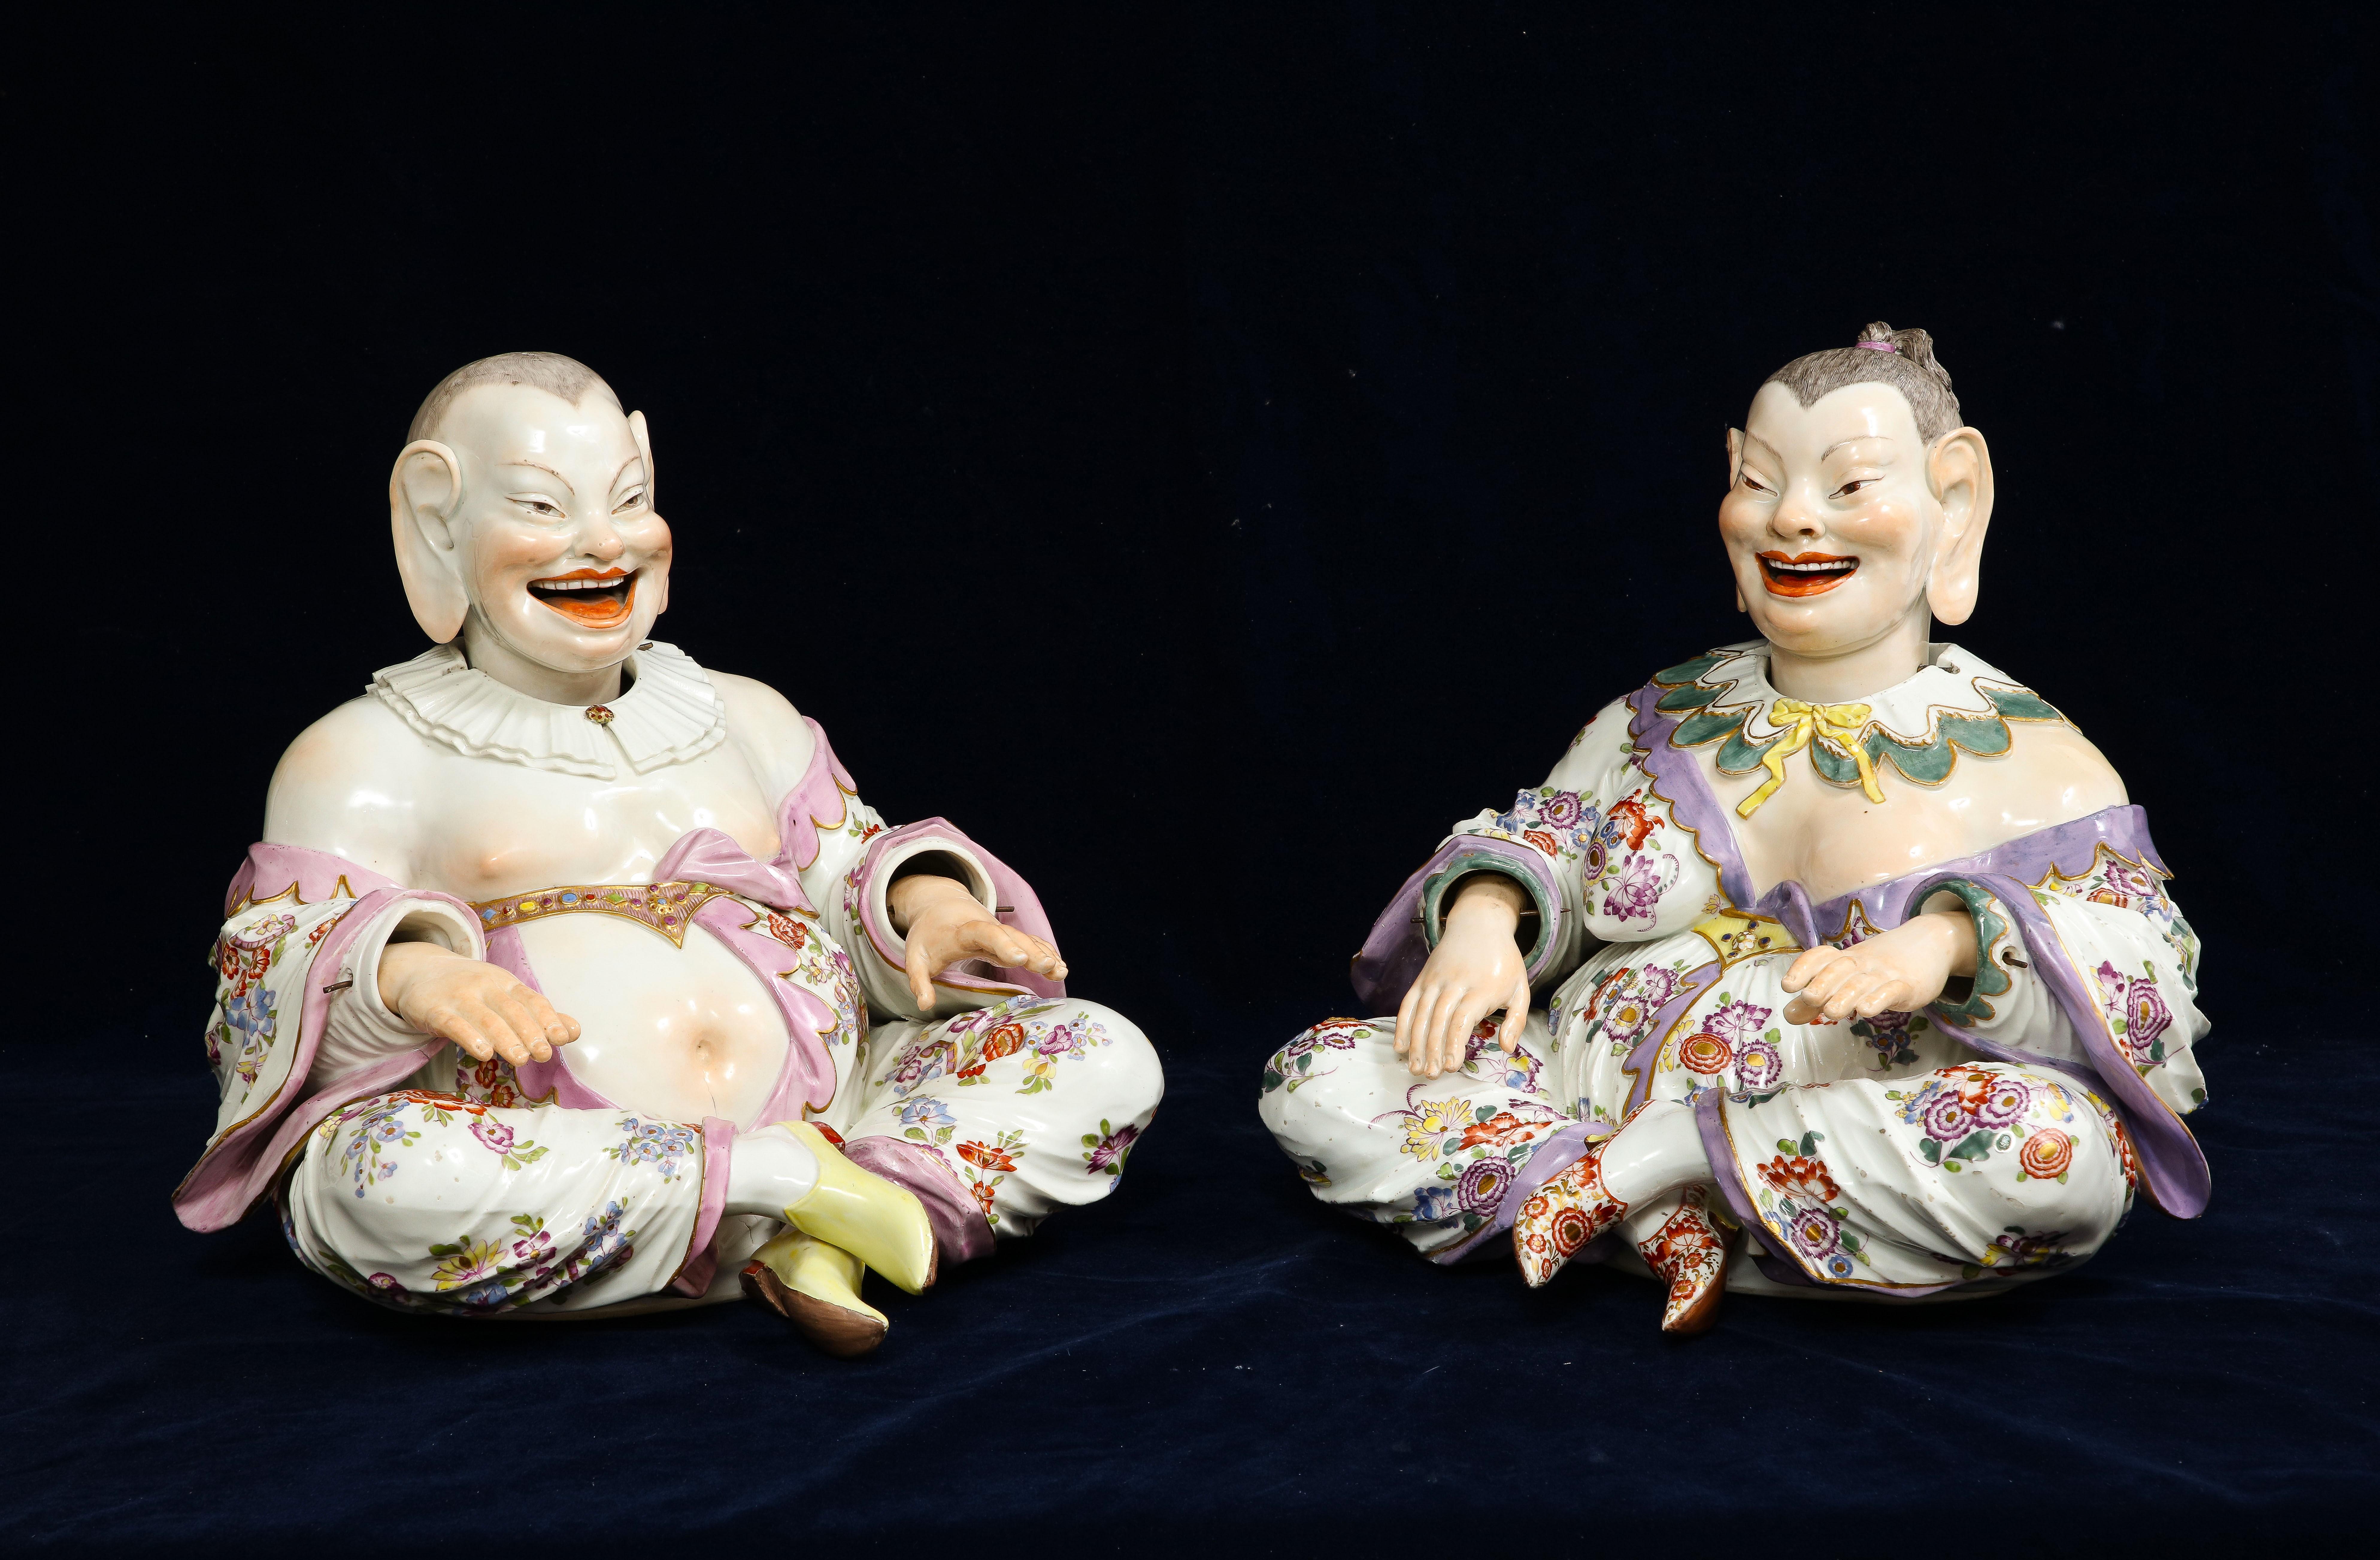 A large rare pair of 19th century Meissen Chinoiserie style Nodding Pagoda Figures with Movable Head, Hand and Tongue, known as a 